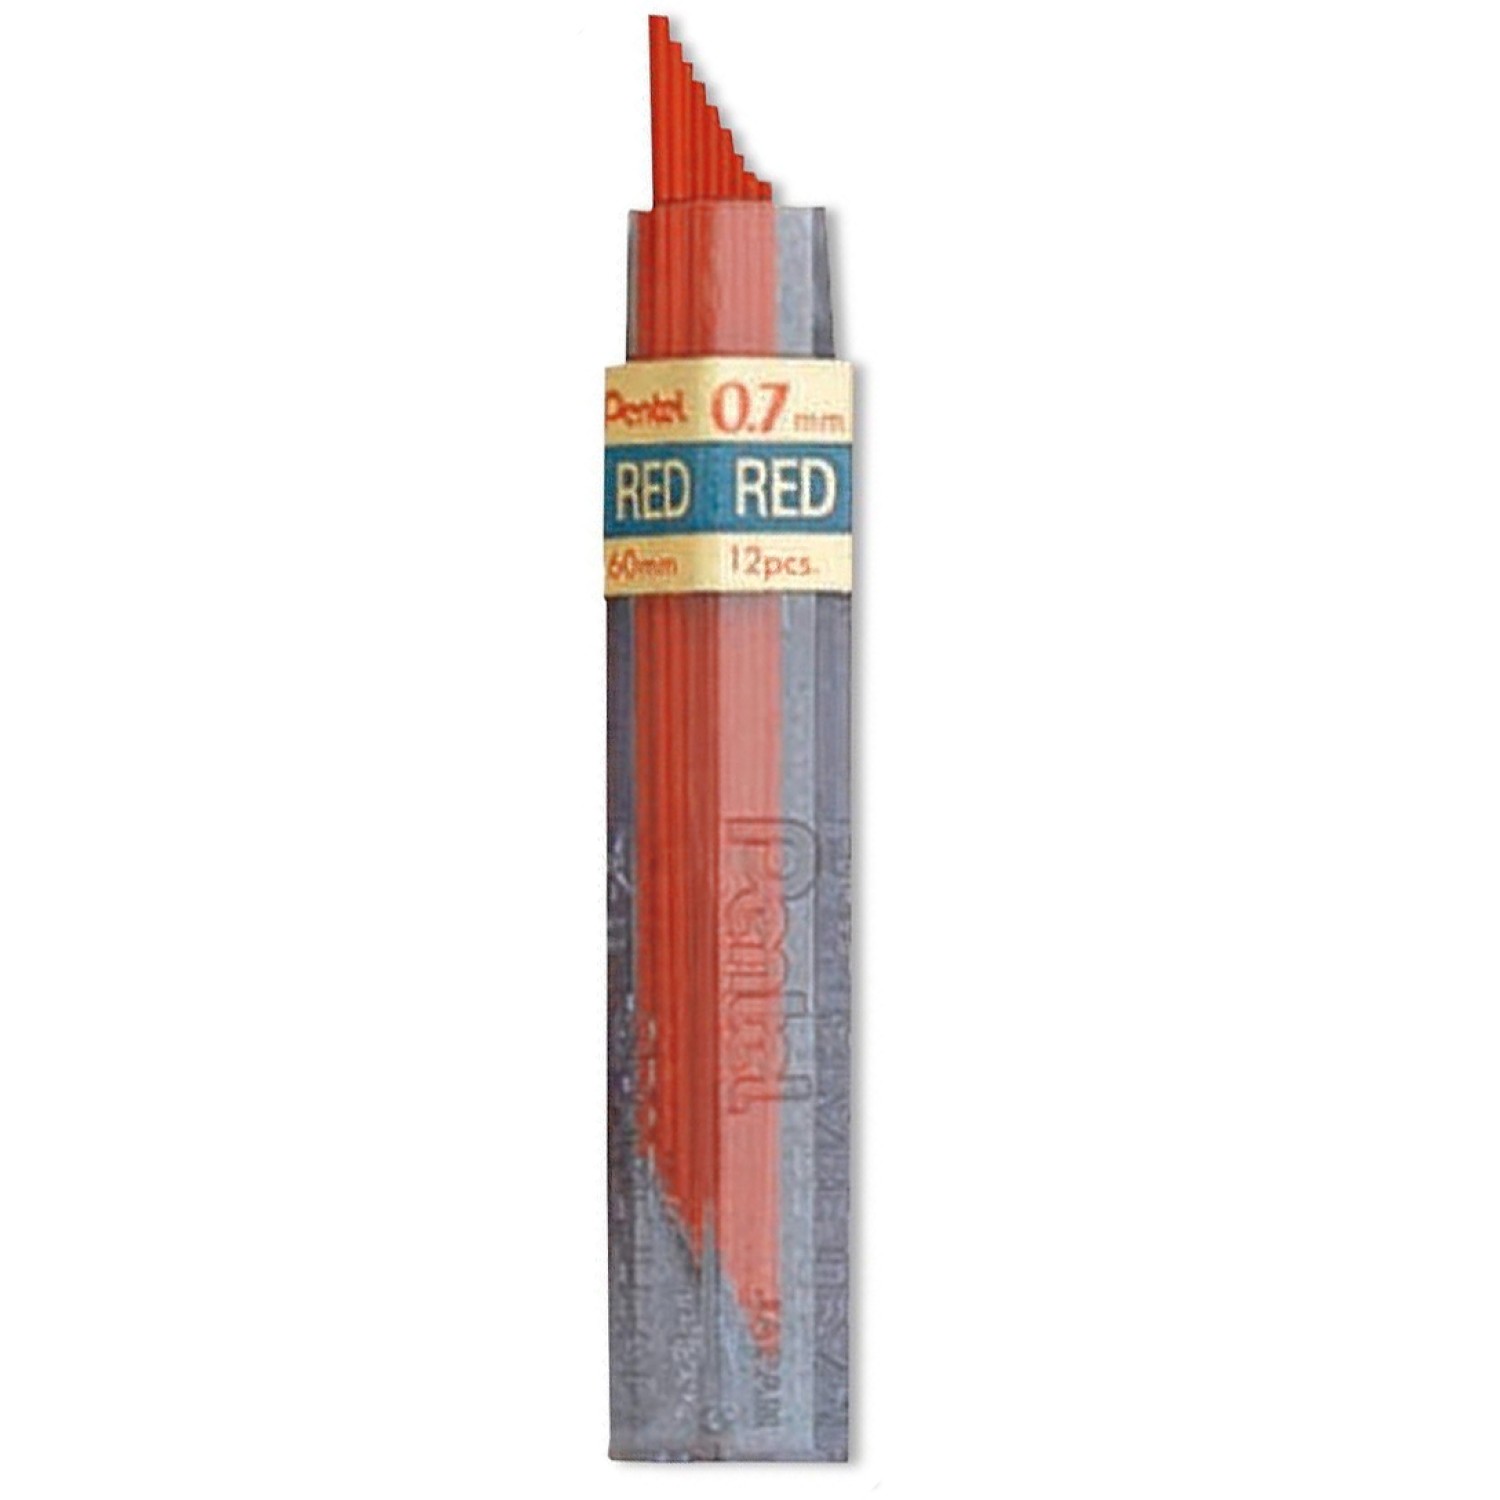 Pentel Colored Lead, 0.7mm Red 12 Leads 